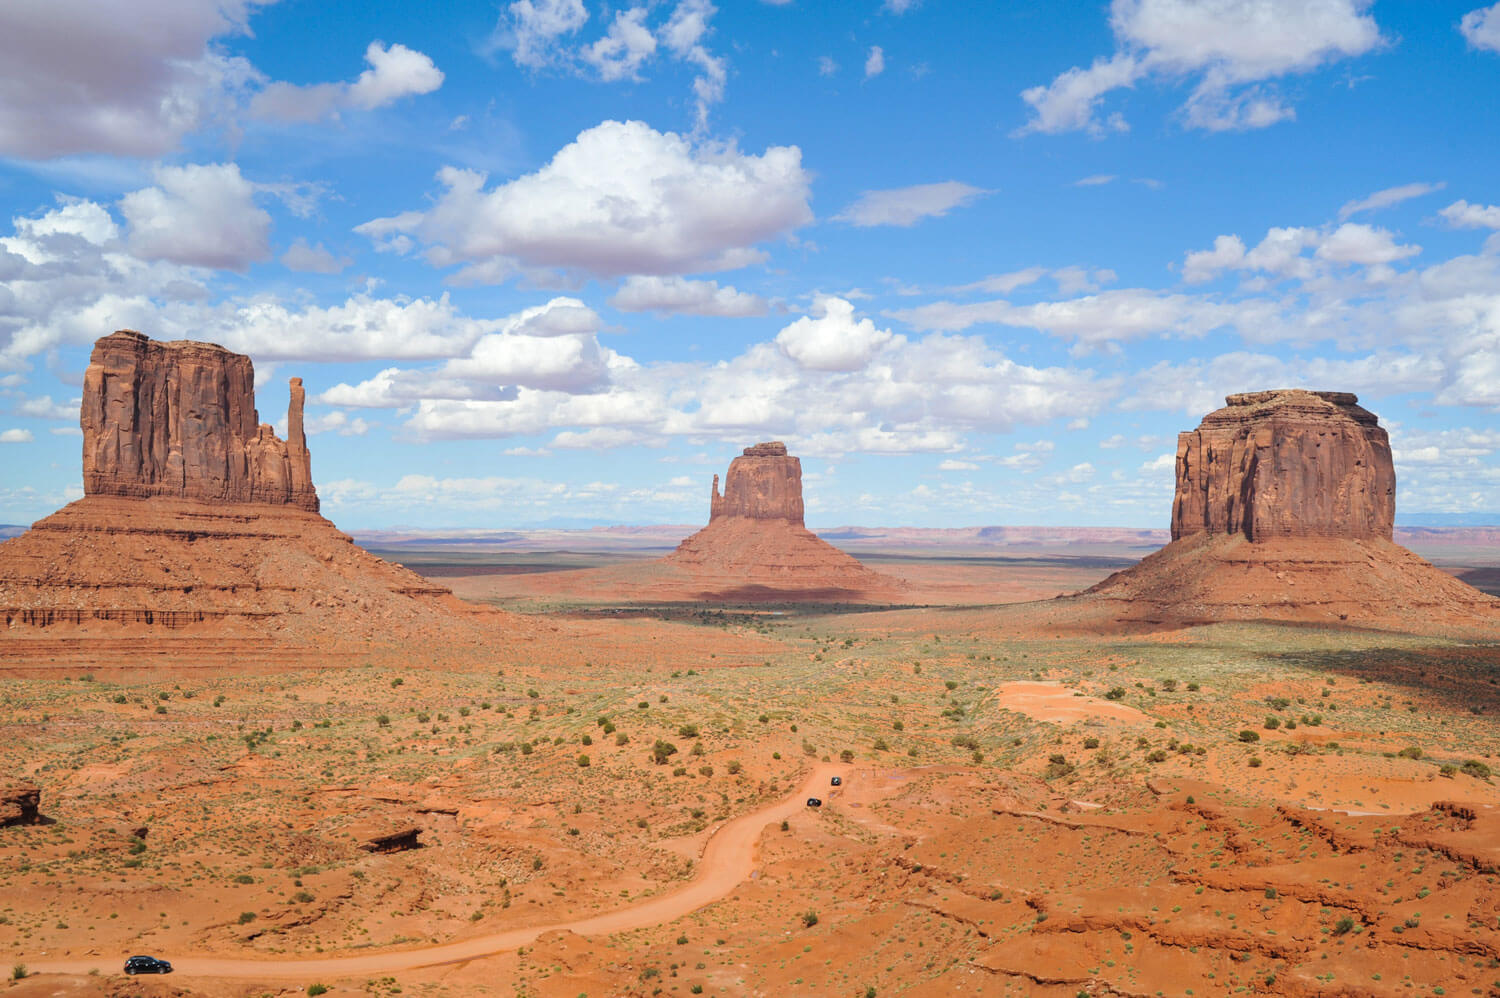 Panoramic view of a desert landscape featuring two mesas, Monument Valley, in the distance, with a winding dirt road in the foreground